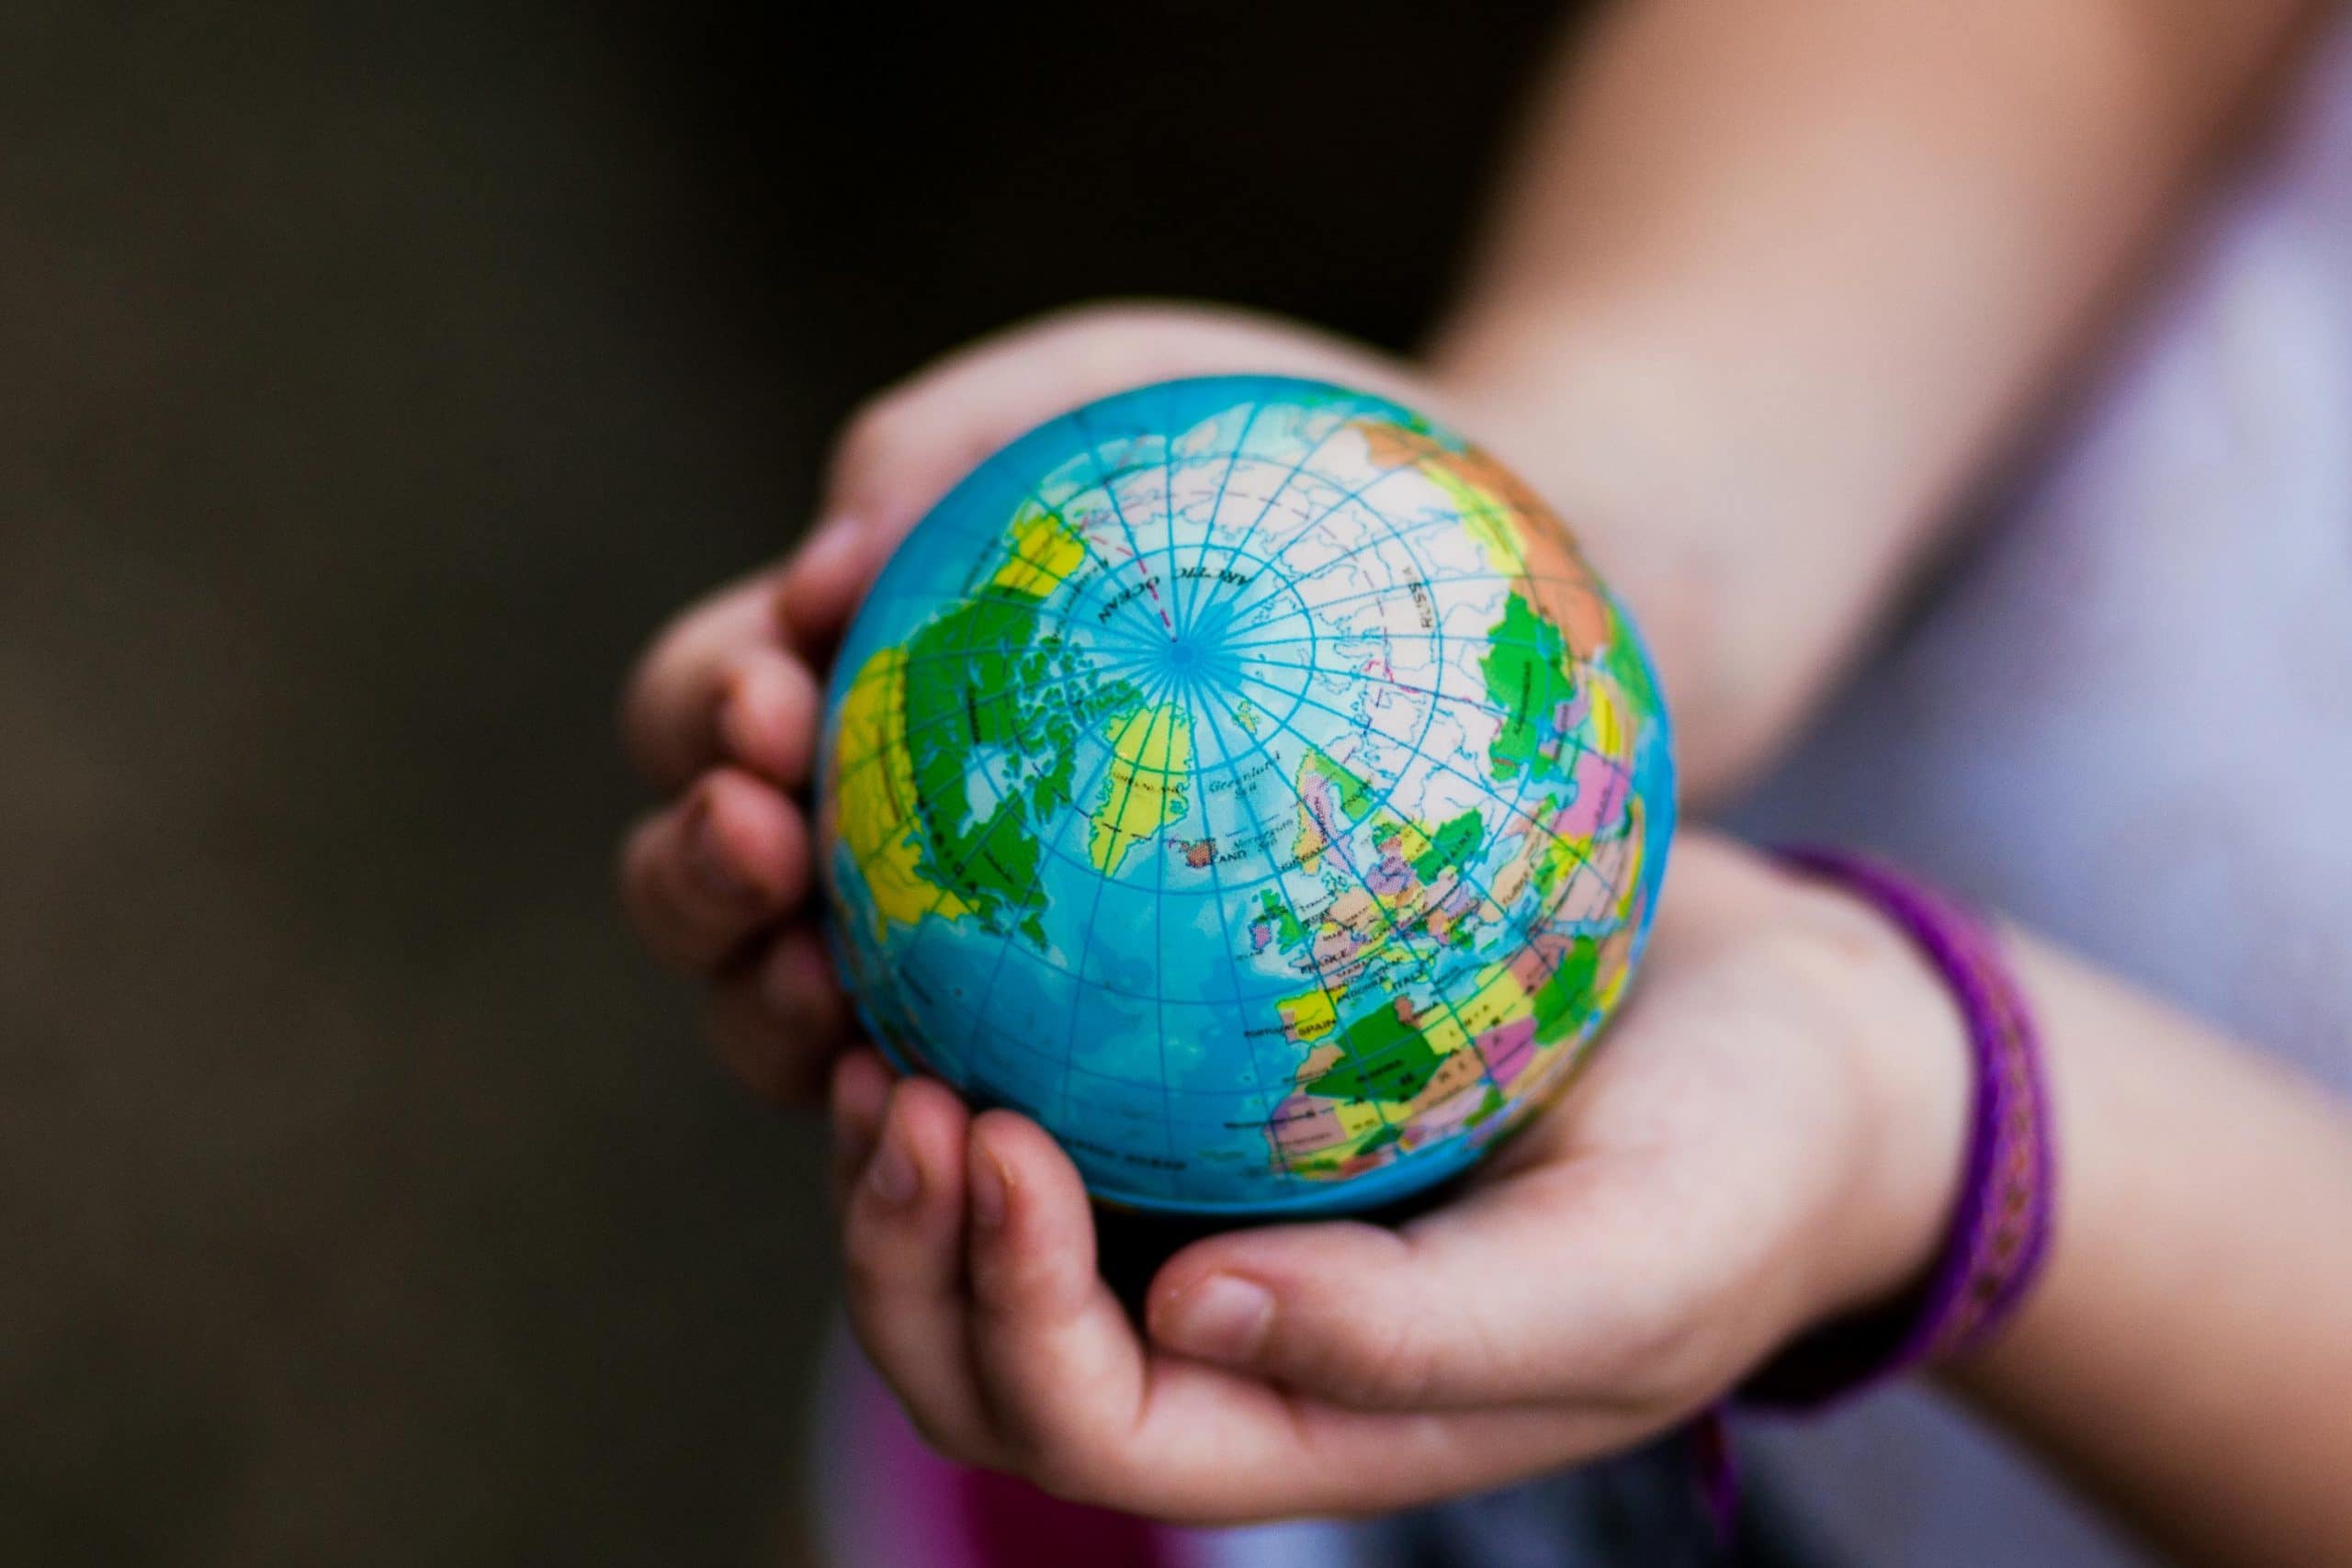 A child's hands holding a globe to represent relocating with children